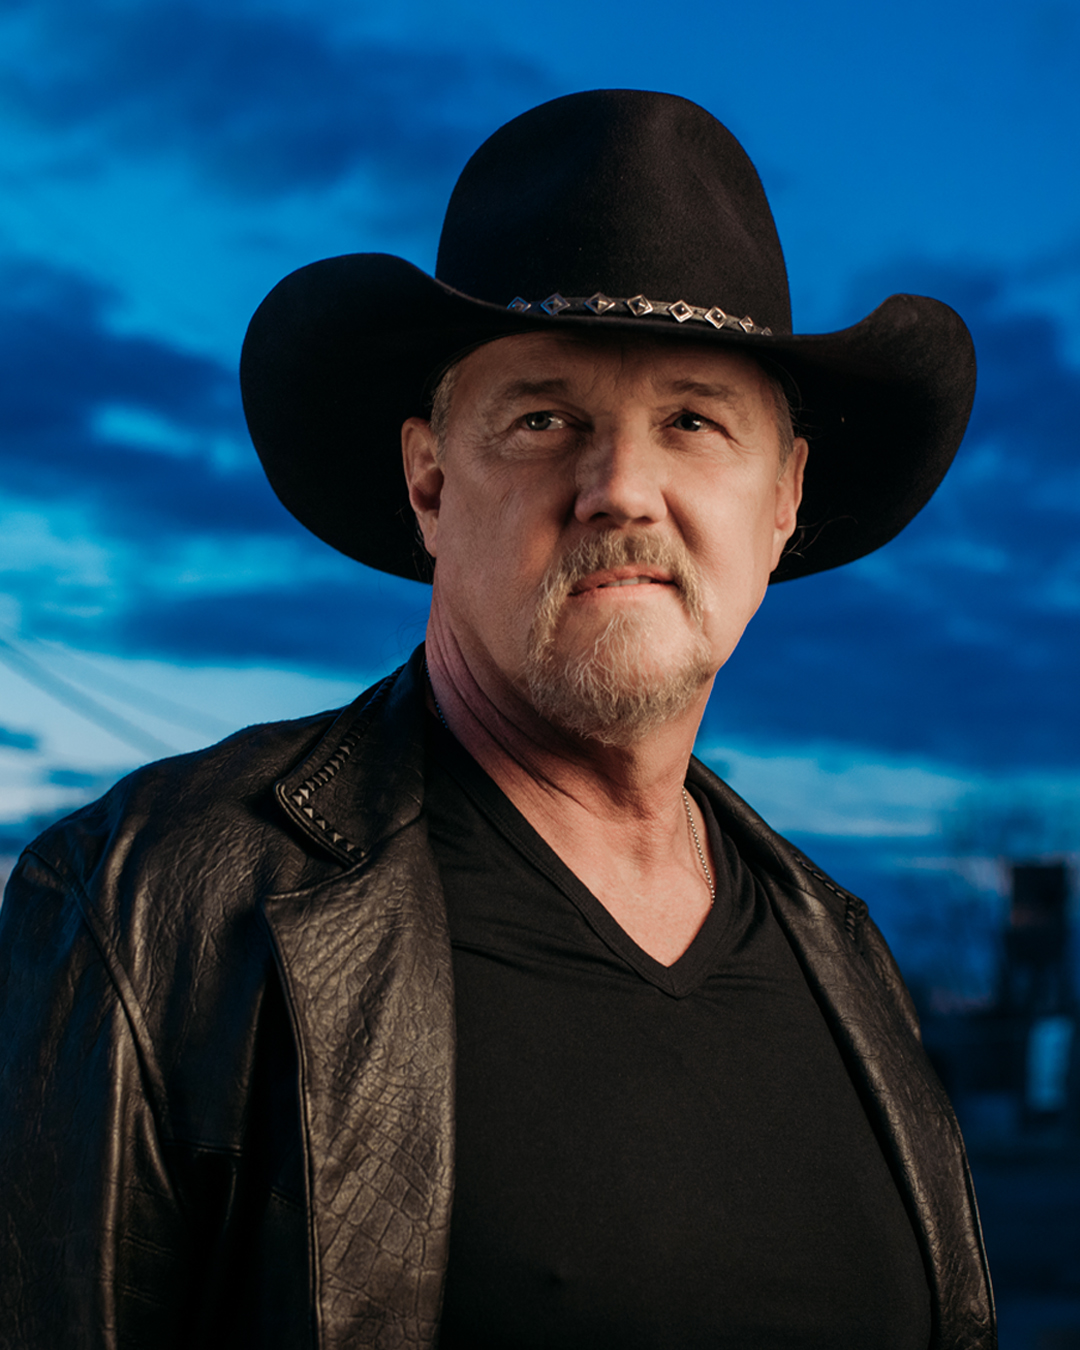 trace adkins new show